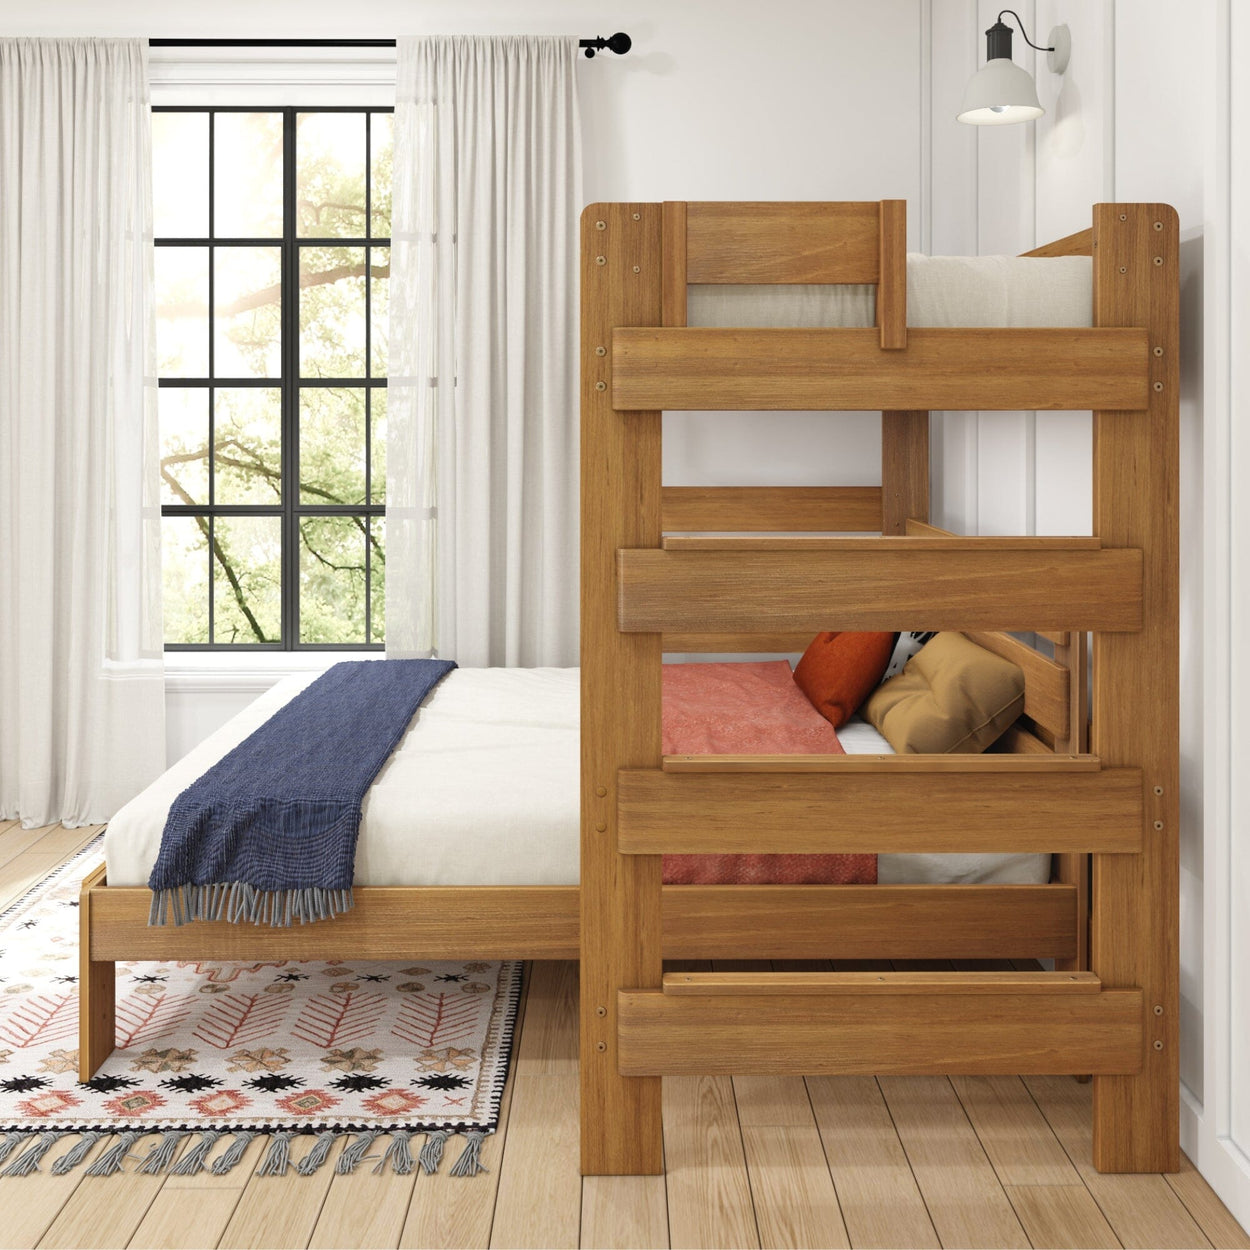 19-813-187 : Bunk Beds Farmhouse Twin over Queen L-Shaped Bunk Bed, Pecan